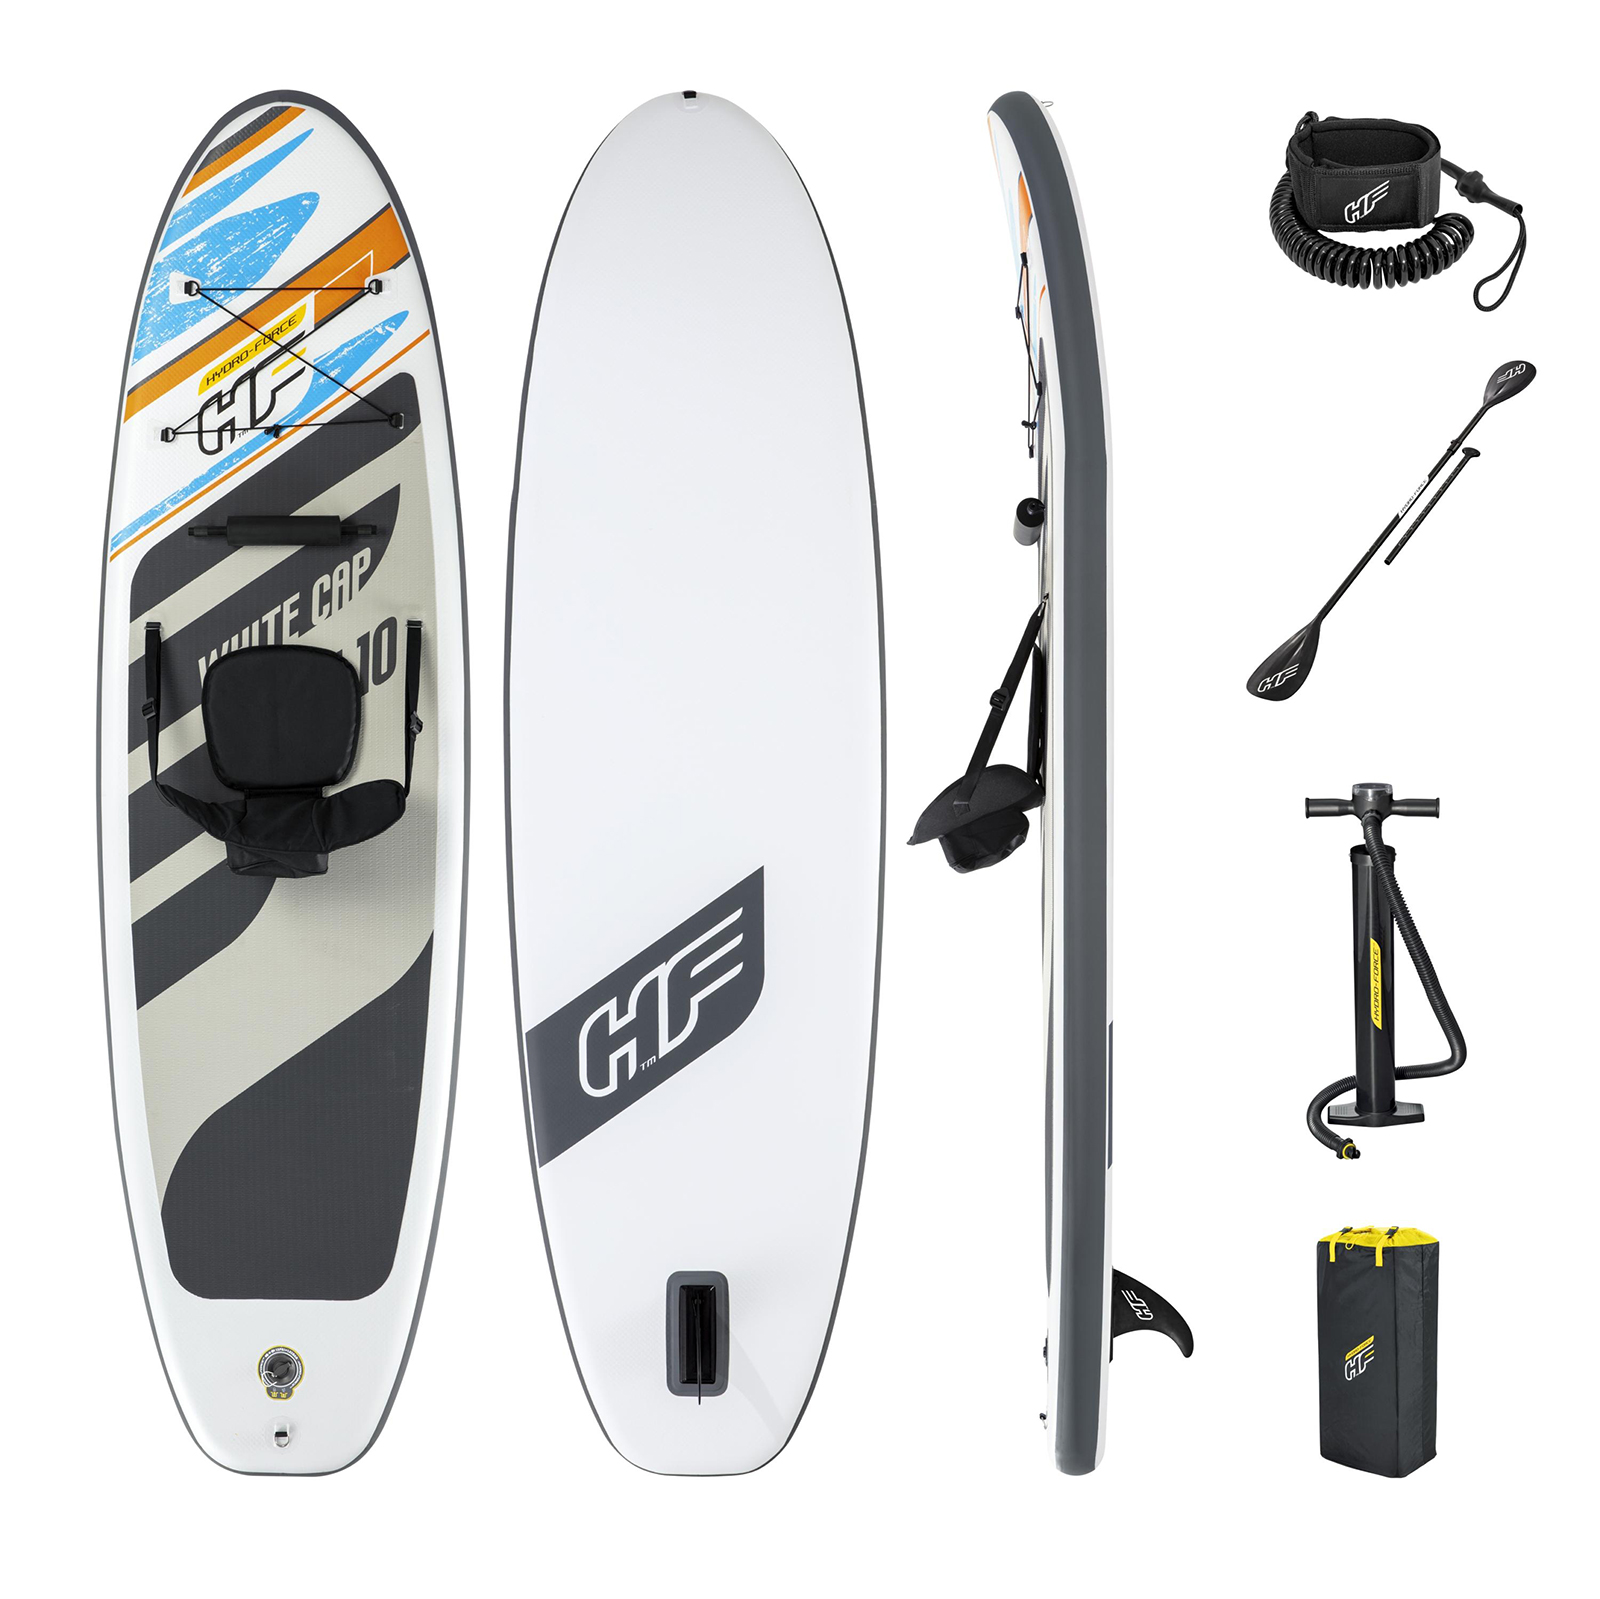 Tabla Paddle Surf Hinchable Bestway Hydro-force White Cap 305x84x12 Cm Remo Doble, Asiento, Bomba,